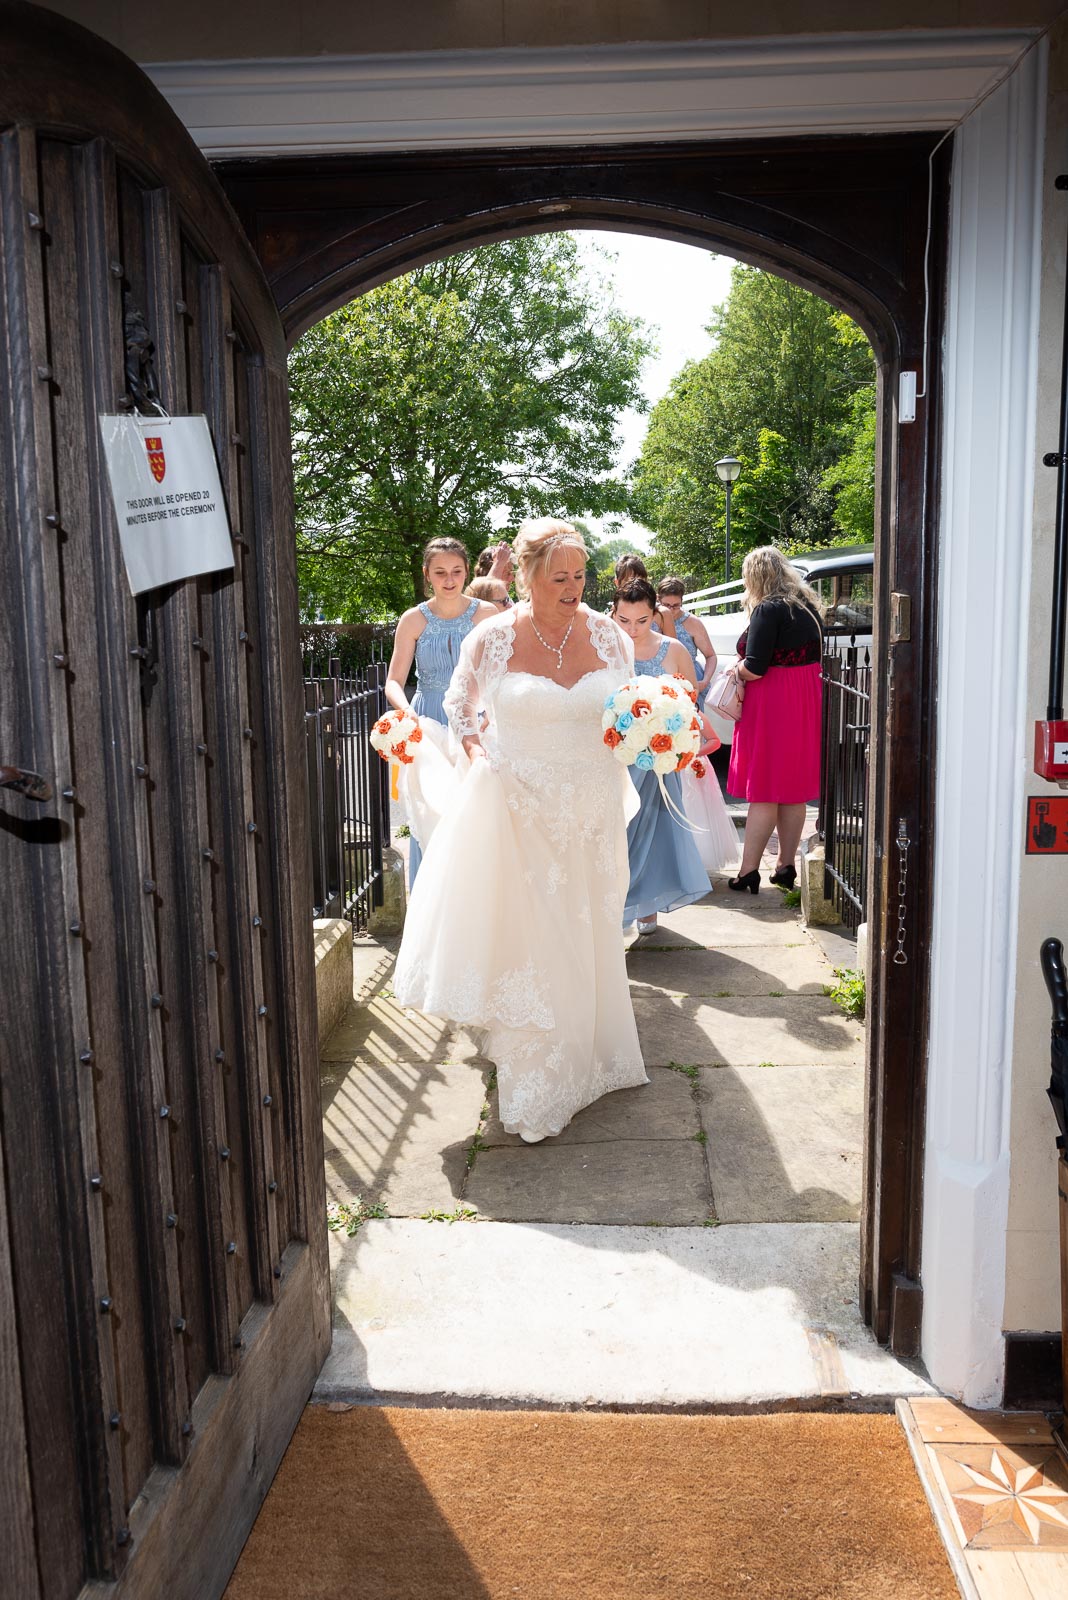 Wendy enters the front door at Lewes Register Wedding before her wedding.